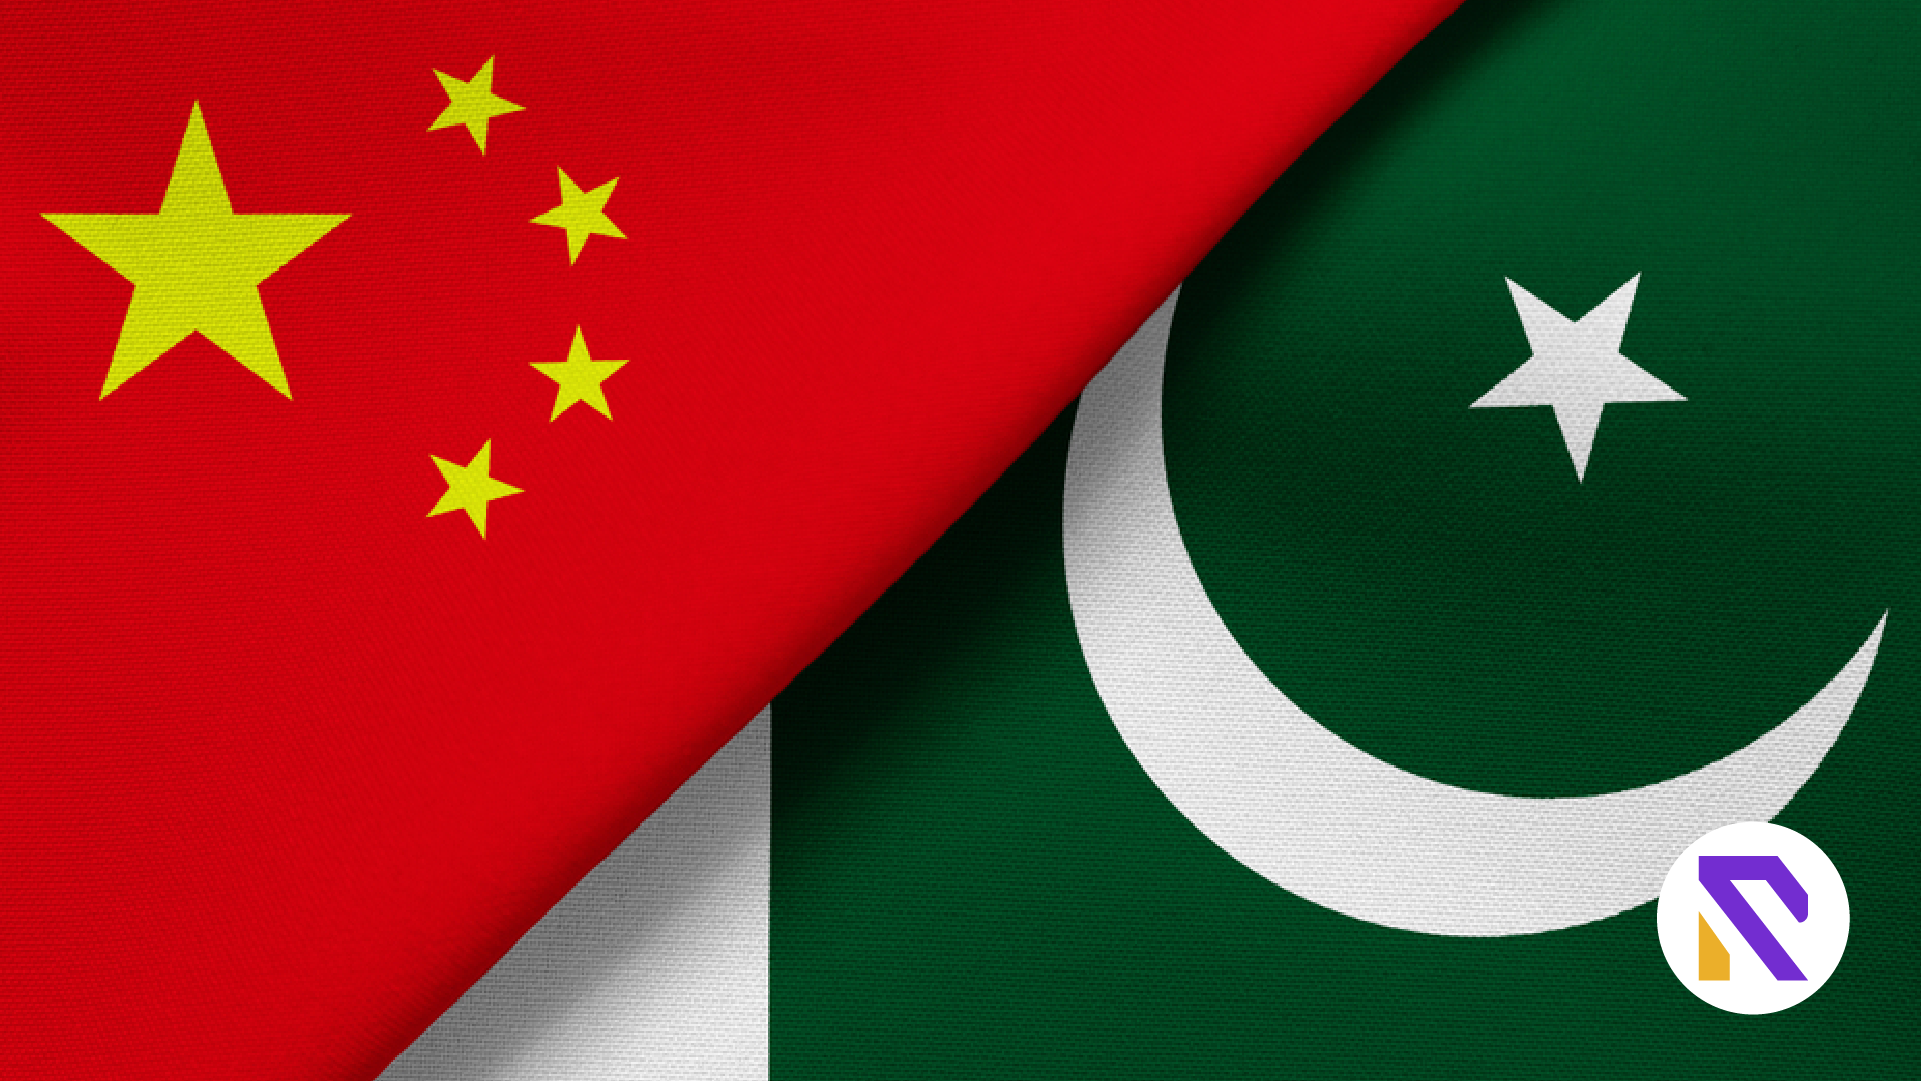 Pakistan and China pledge to strengthen their bilateral relationship- Realtorspk